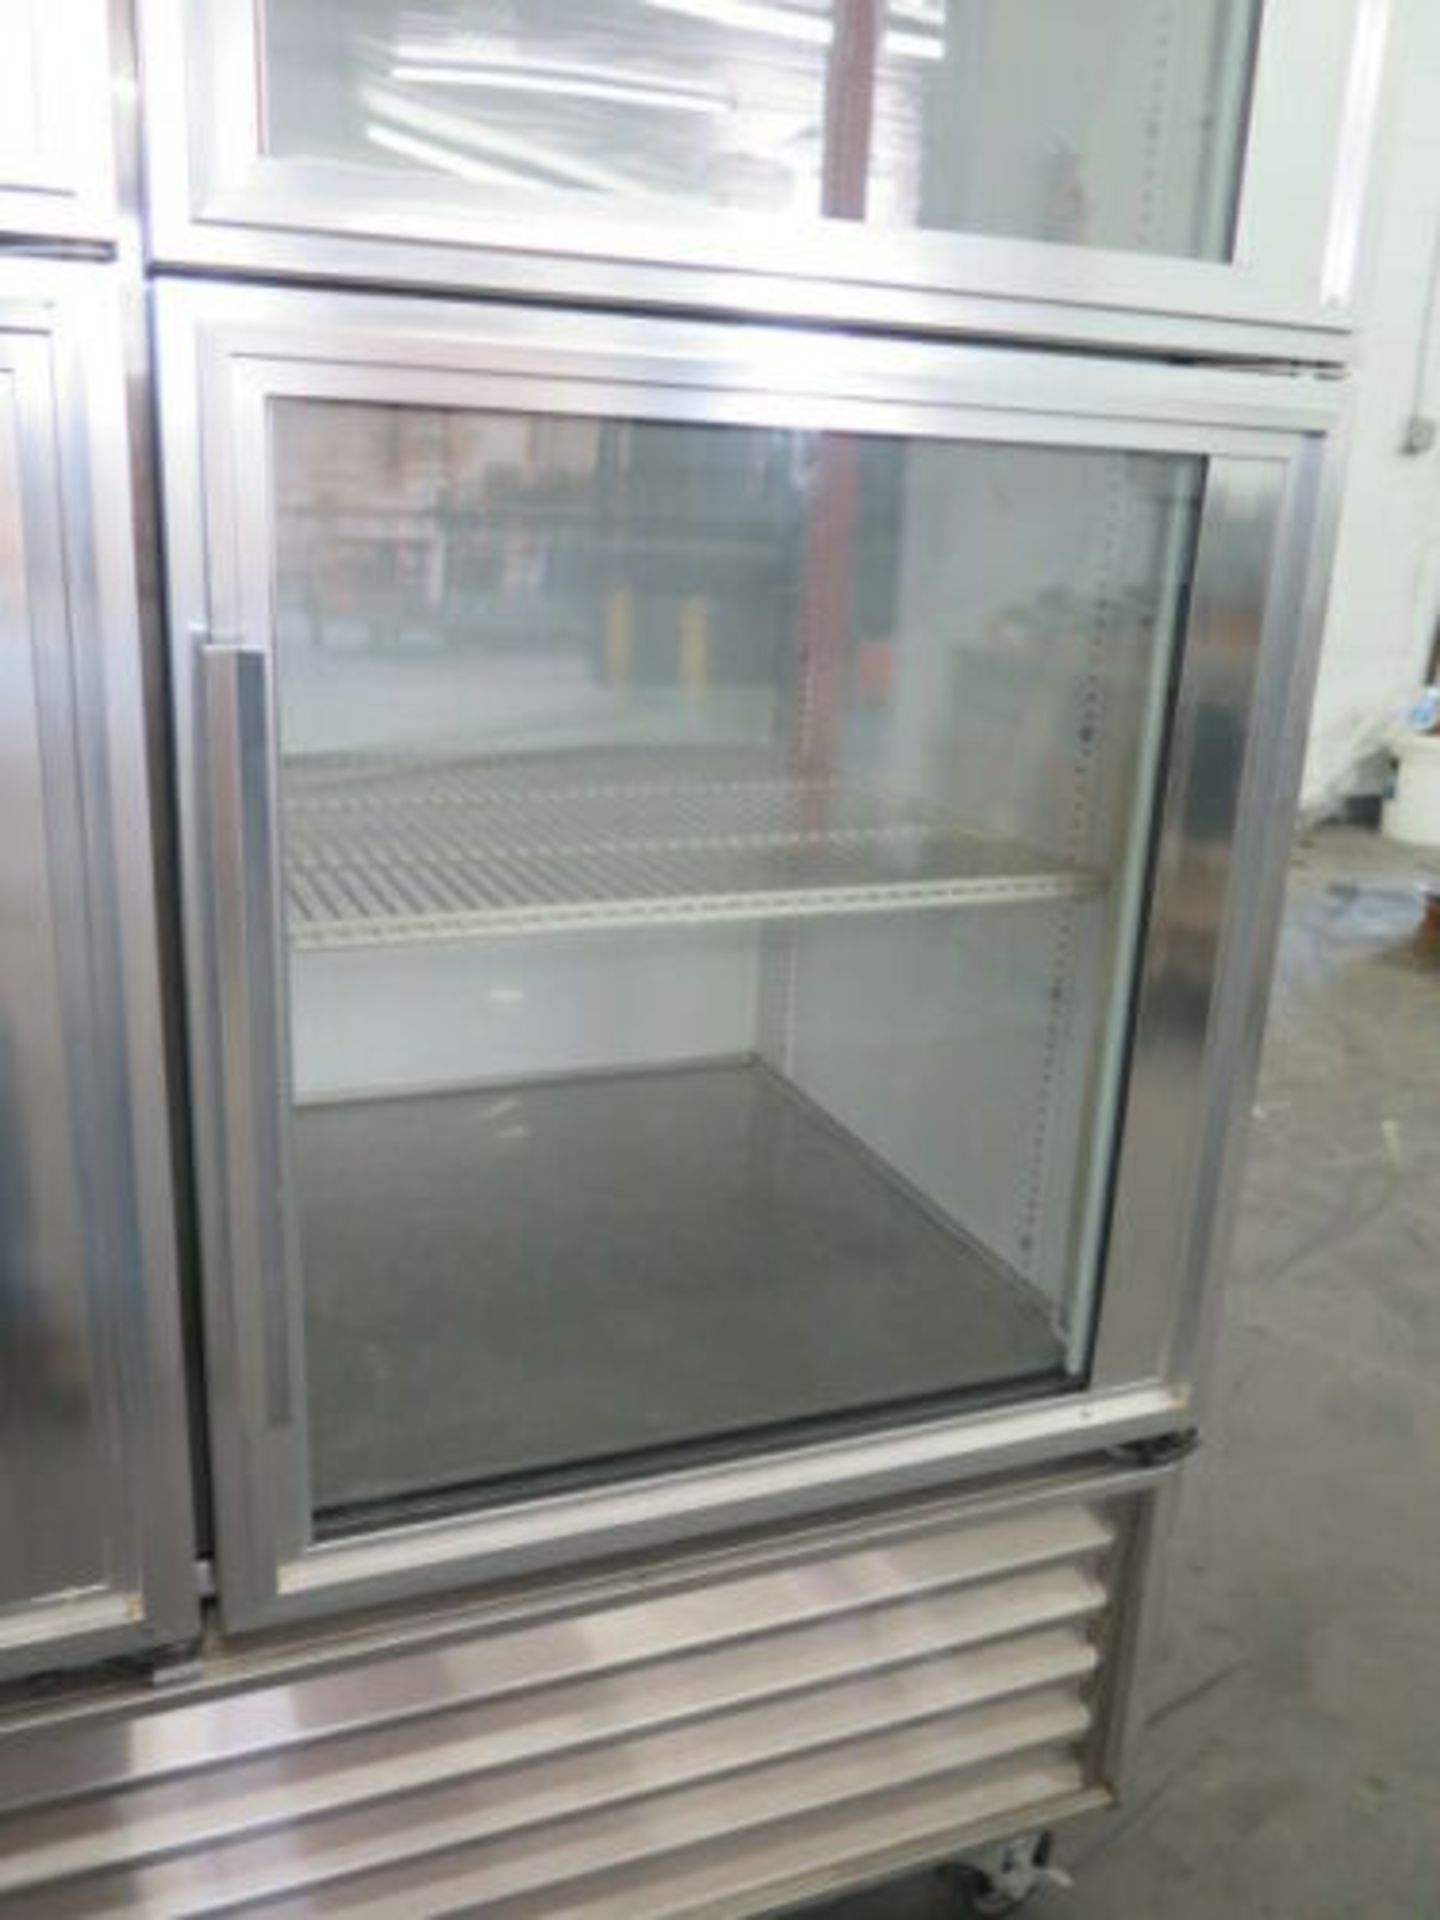 True Mfg. mdl. T-72G-6 6-Door Stainless Steel and Glass Industrial Refrigerator s/n 1-4583449 - Image 6 of 9